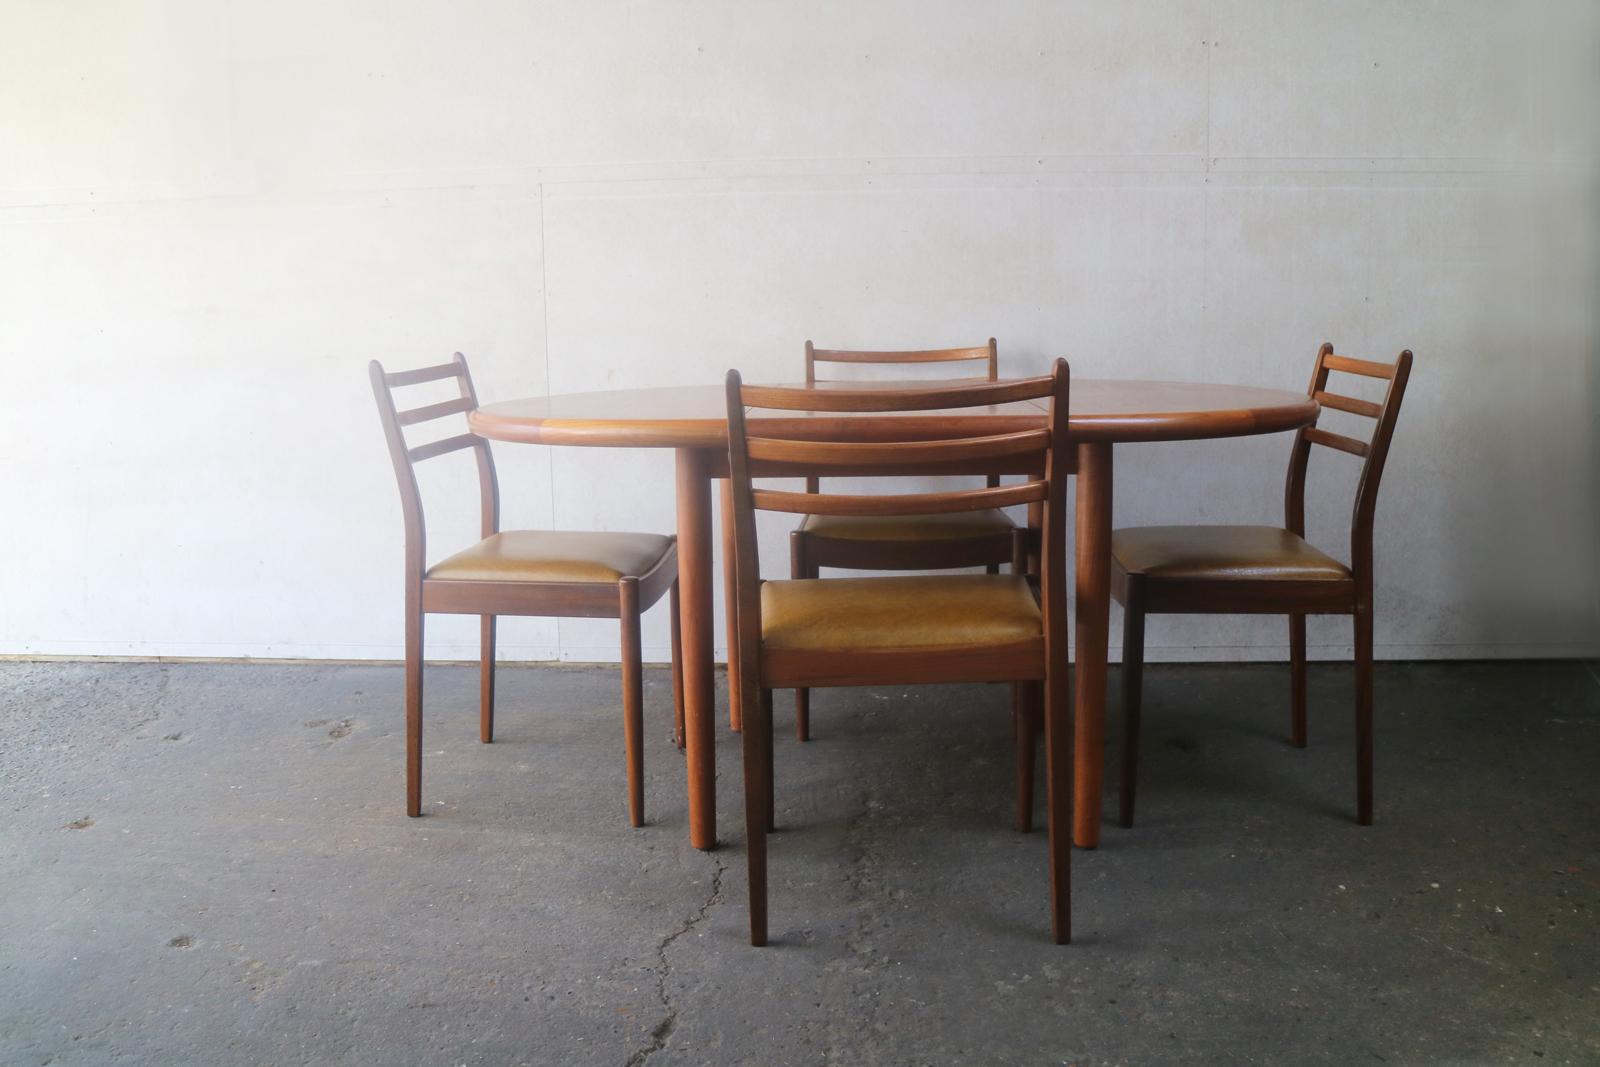 A very fine, relatively small extending Danish dining table with lovely wood grain, thick rounded edges and decorative inlaid edging. The G Plan chairs are elegant, with dark teak frames and mustard colored vinyl seating.

Table is stamped ‘Made